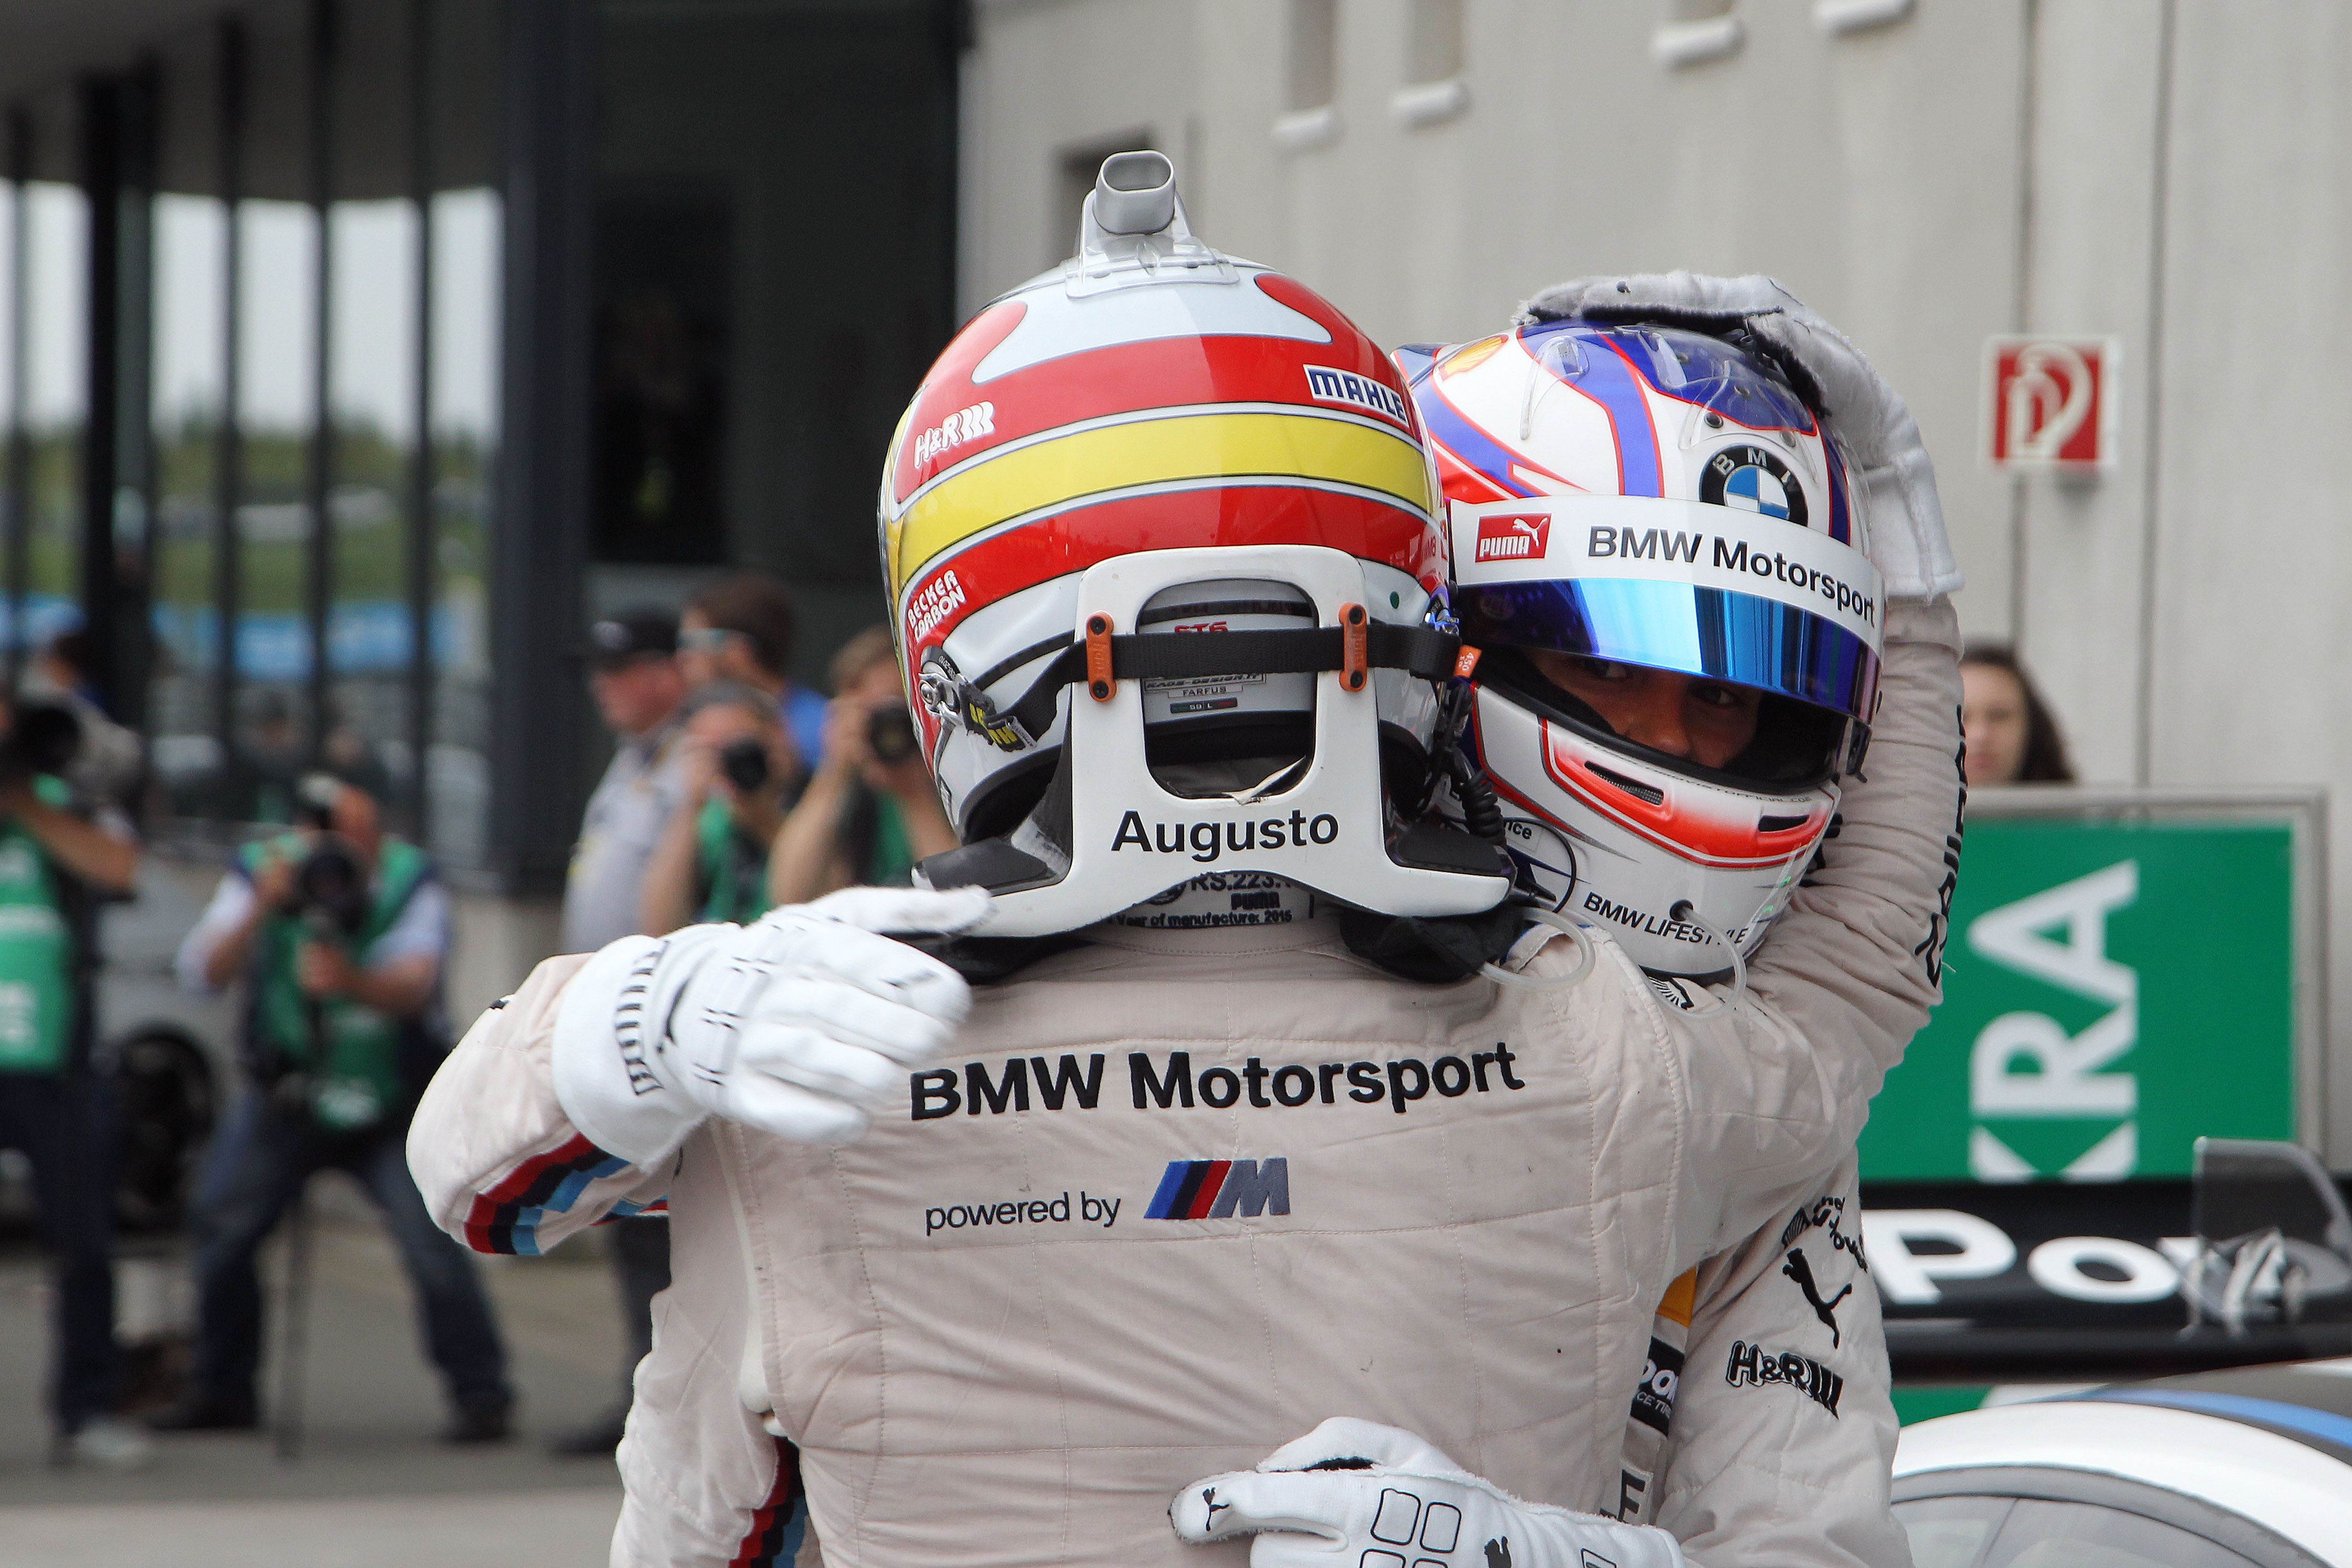 Oschersleben (DE) 13th September 2015. BMW Motorsport, Race 14, 2nd Place Driver Augusto Farfus and Winner Tom Blomqvist (GB). This image is copyright free for editorial use © BMW AG (09/2015).